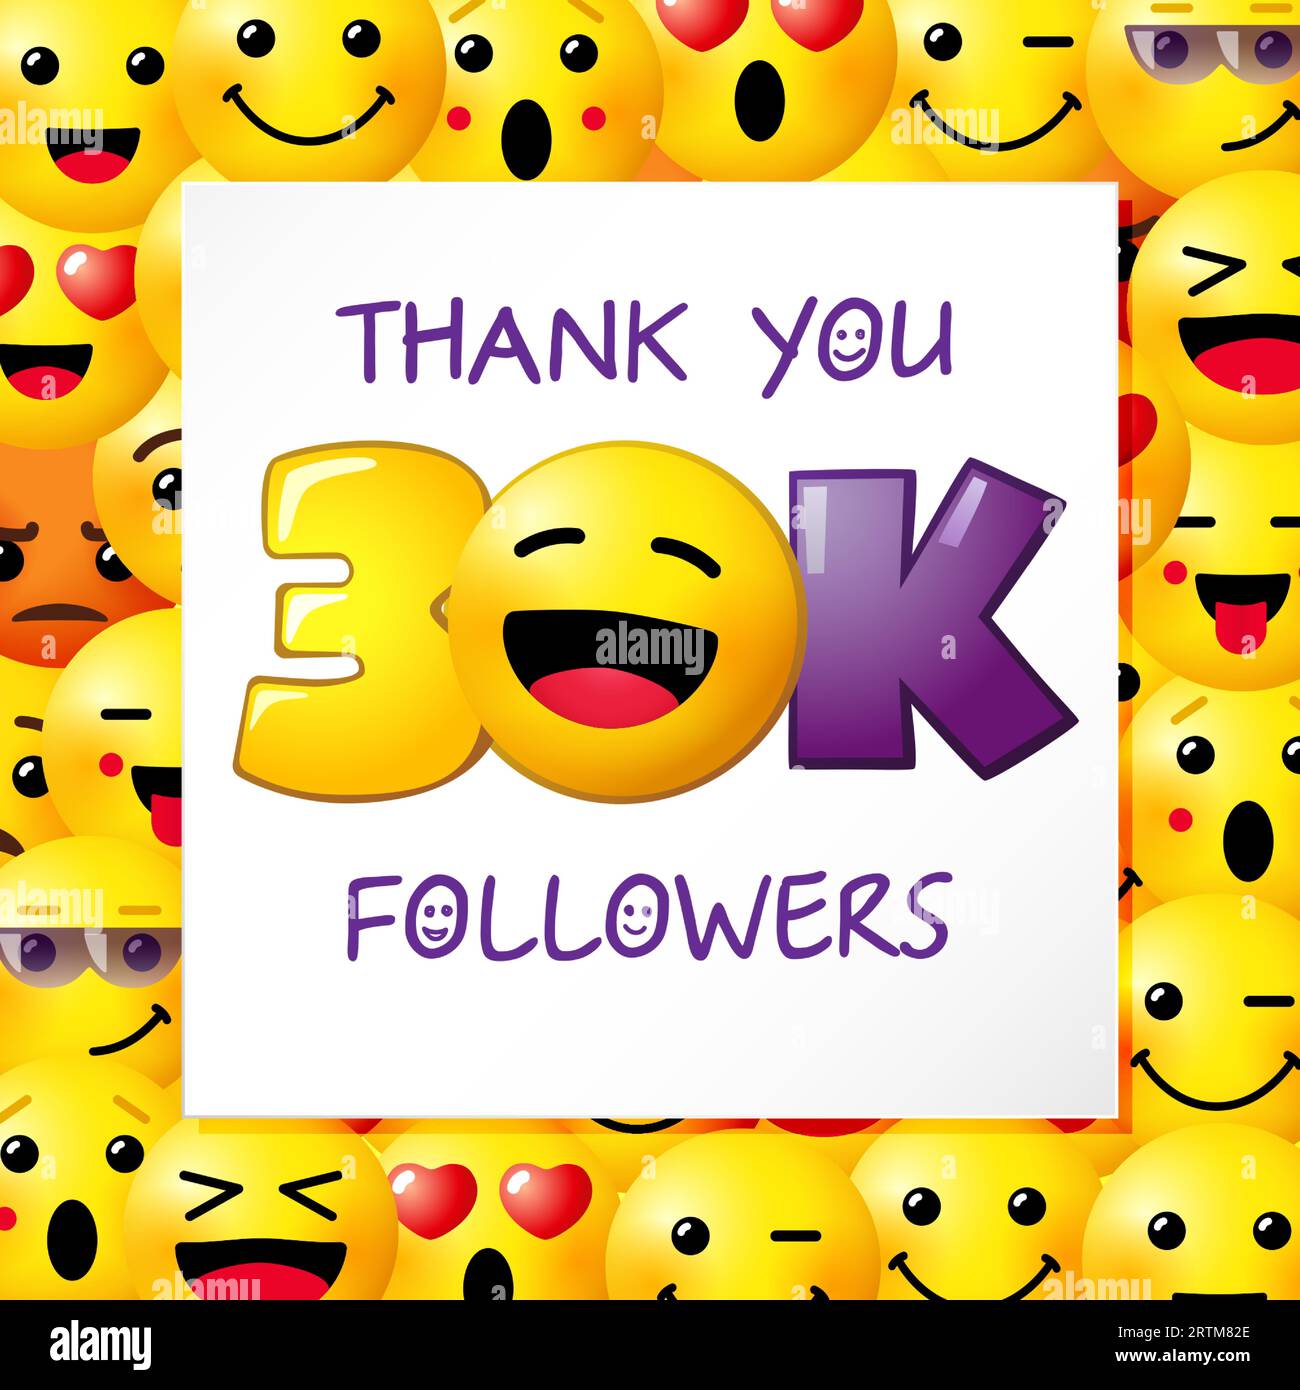 Thank you 30K followers greeting card design. Creative funny background and 3D sheet of paper. Thanks for 30 000 likes idea with messenger yellow face Stock Vector